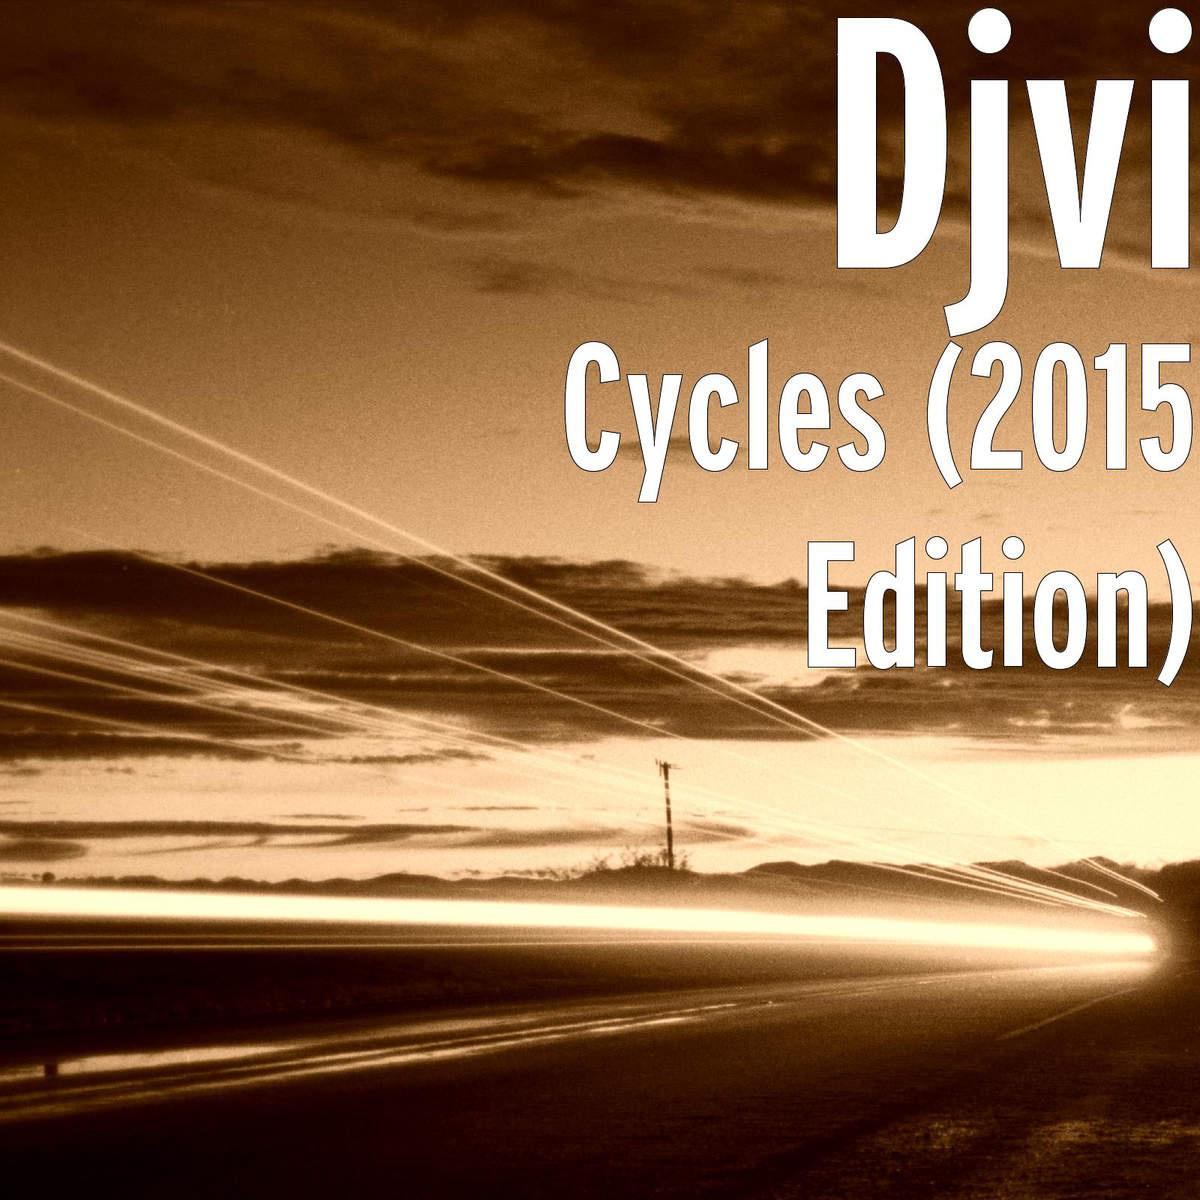 Cycles (2015 Edition)